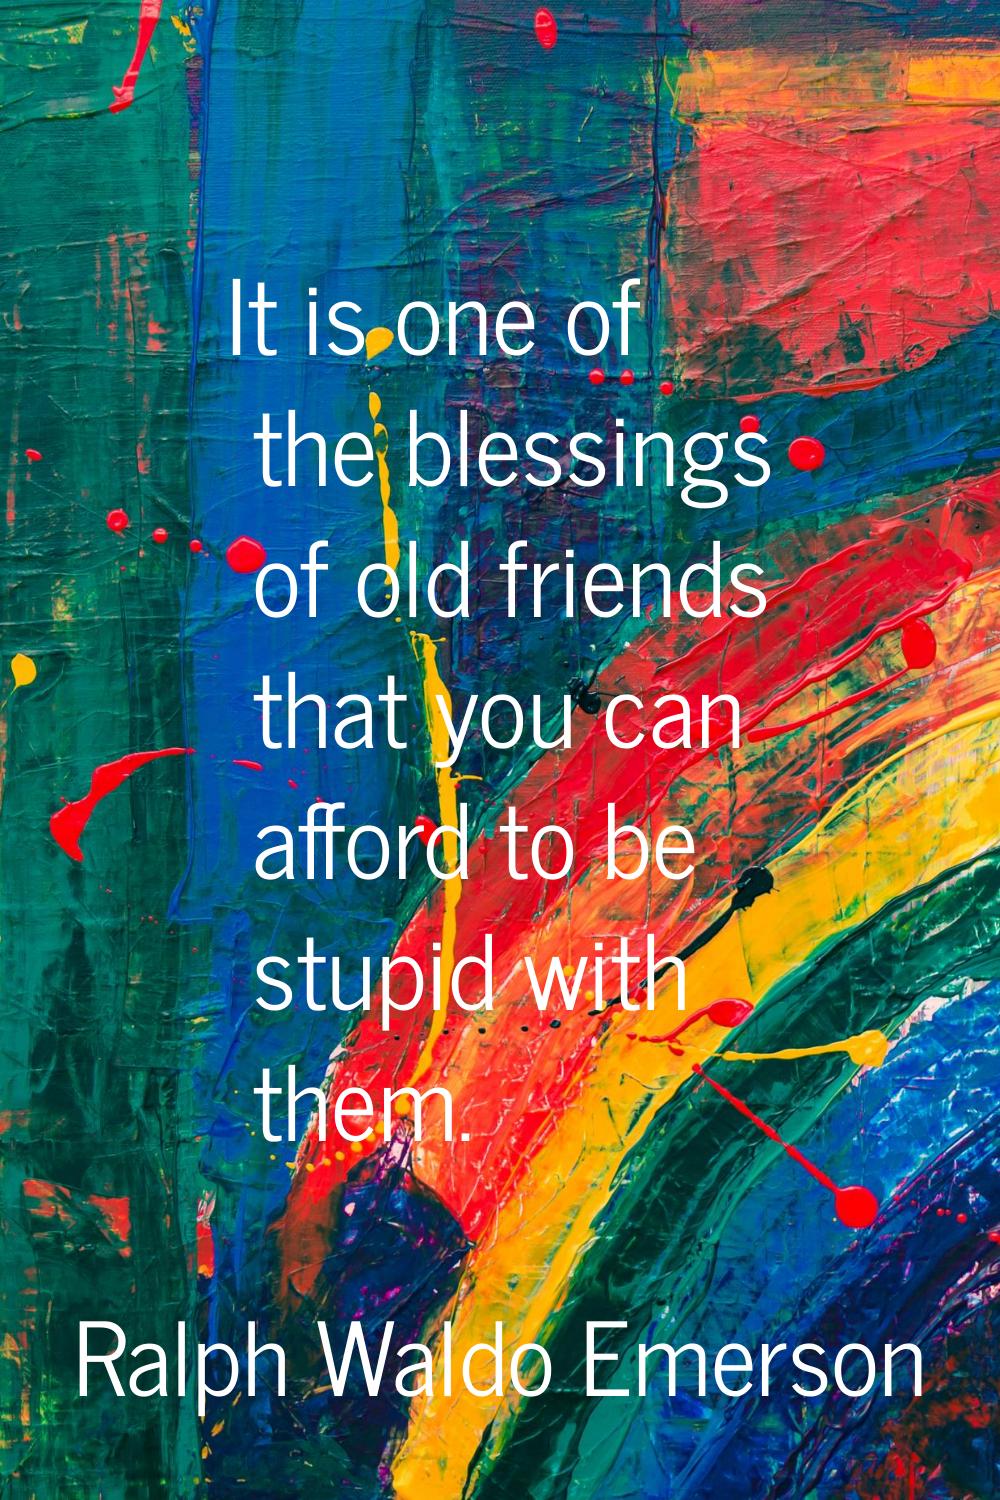 It is one of the blessings of old friends that you can afford to be stupid with them.